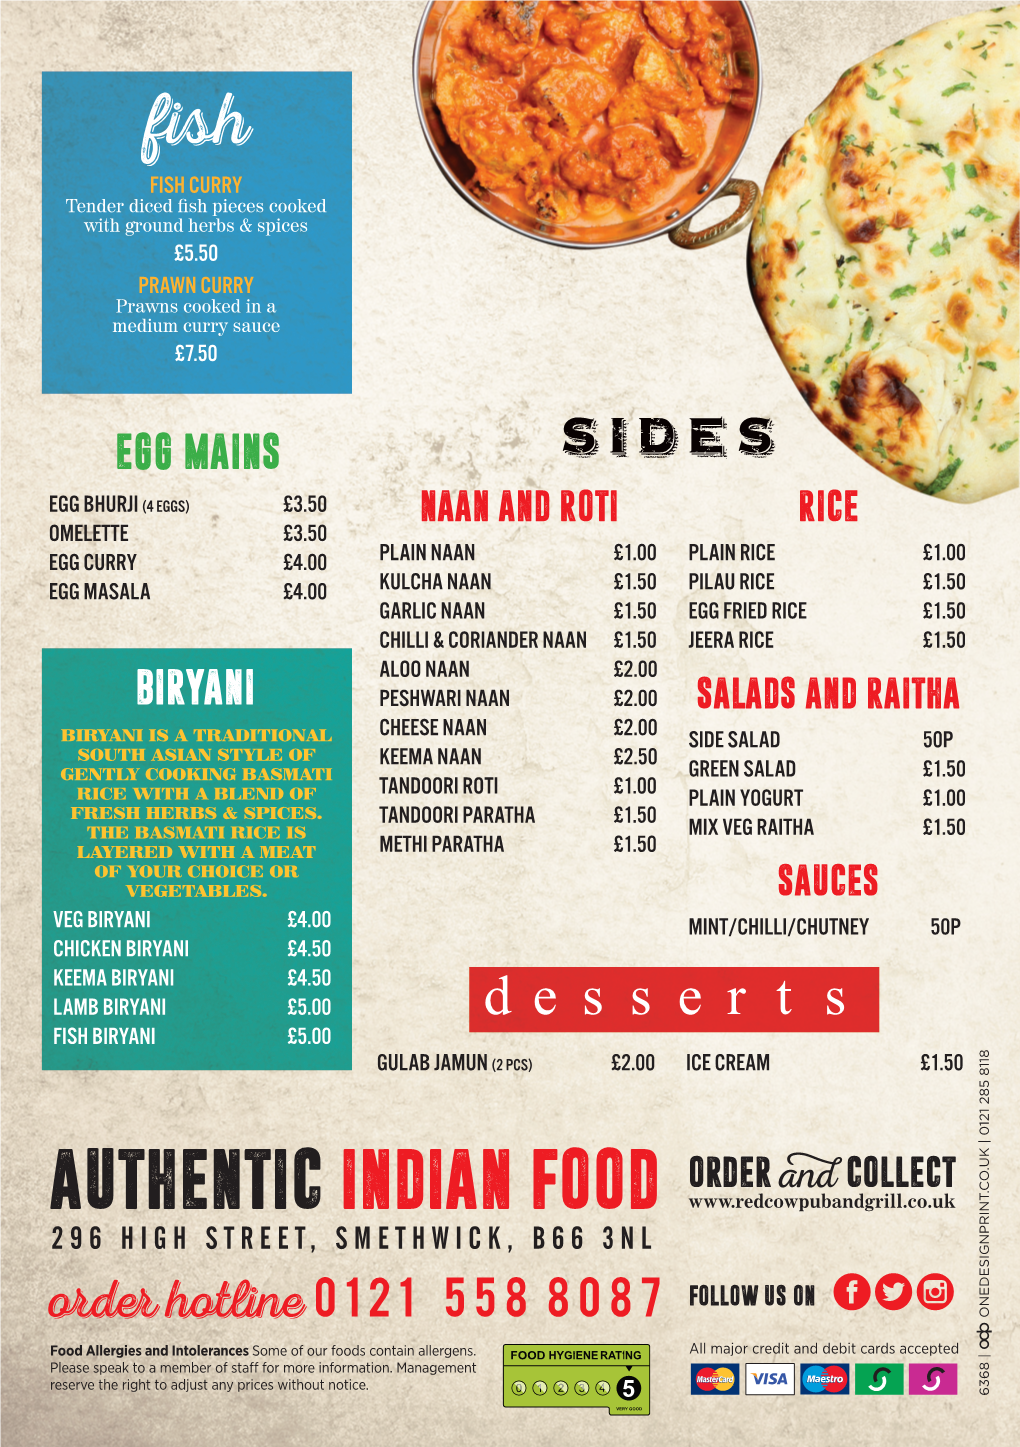 Authentic Indian Food